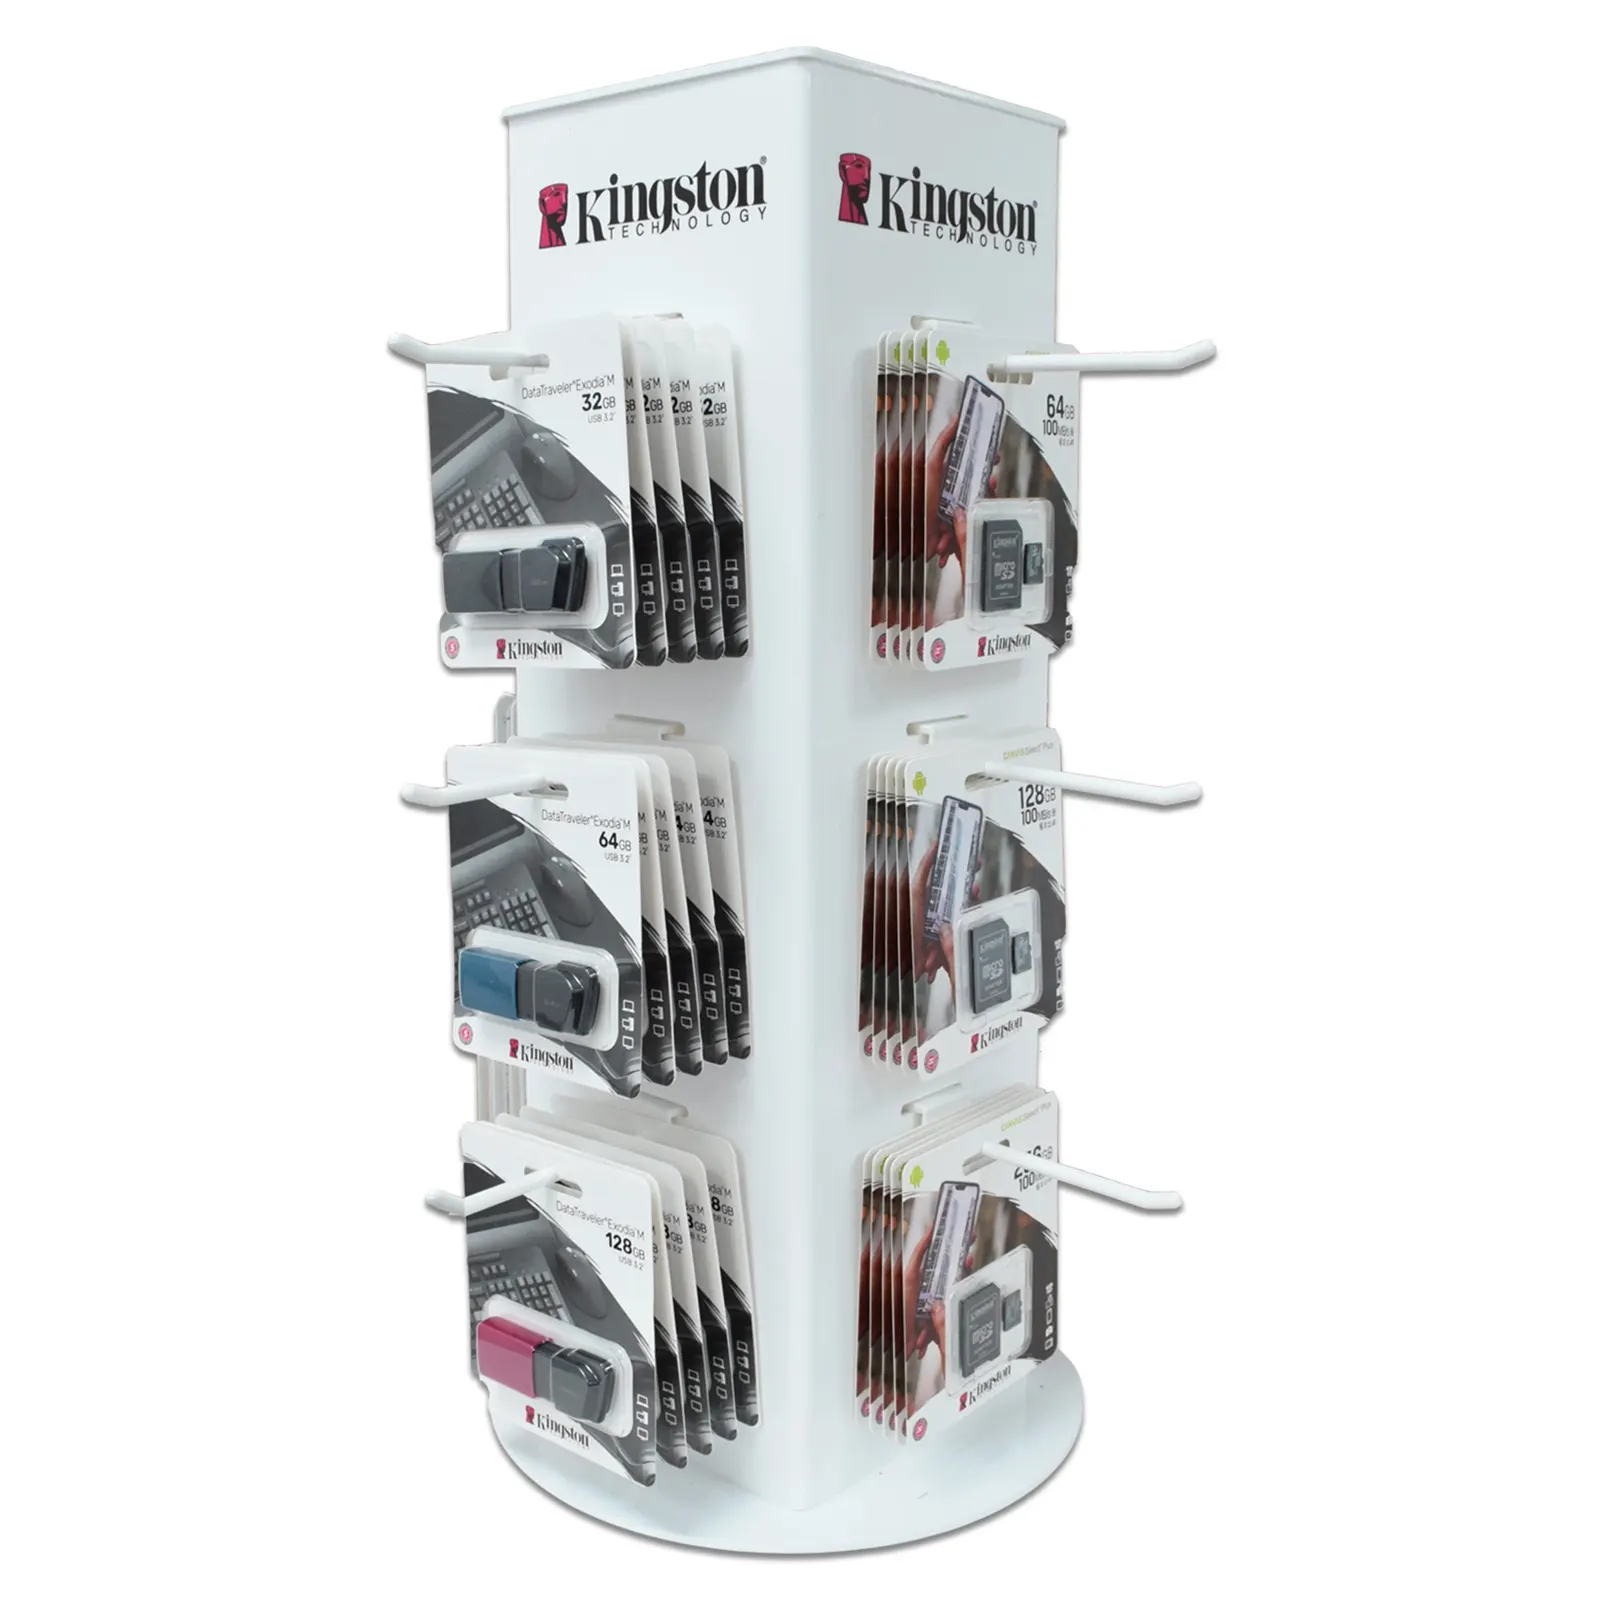 Kingston USB & SD Card Complete Retail Bundle with FREE Kingston-Branded Countertop Display Stand & 56 Units of Bestselling Lines